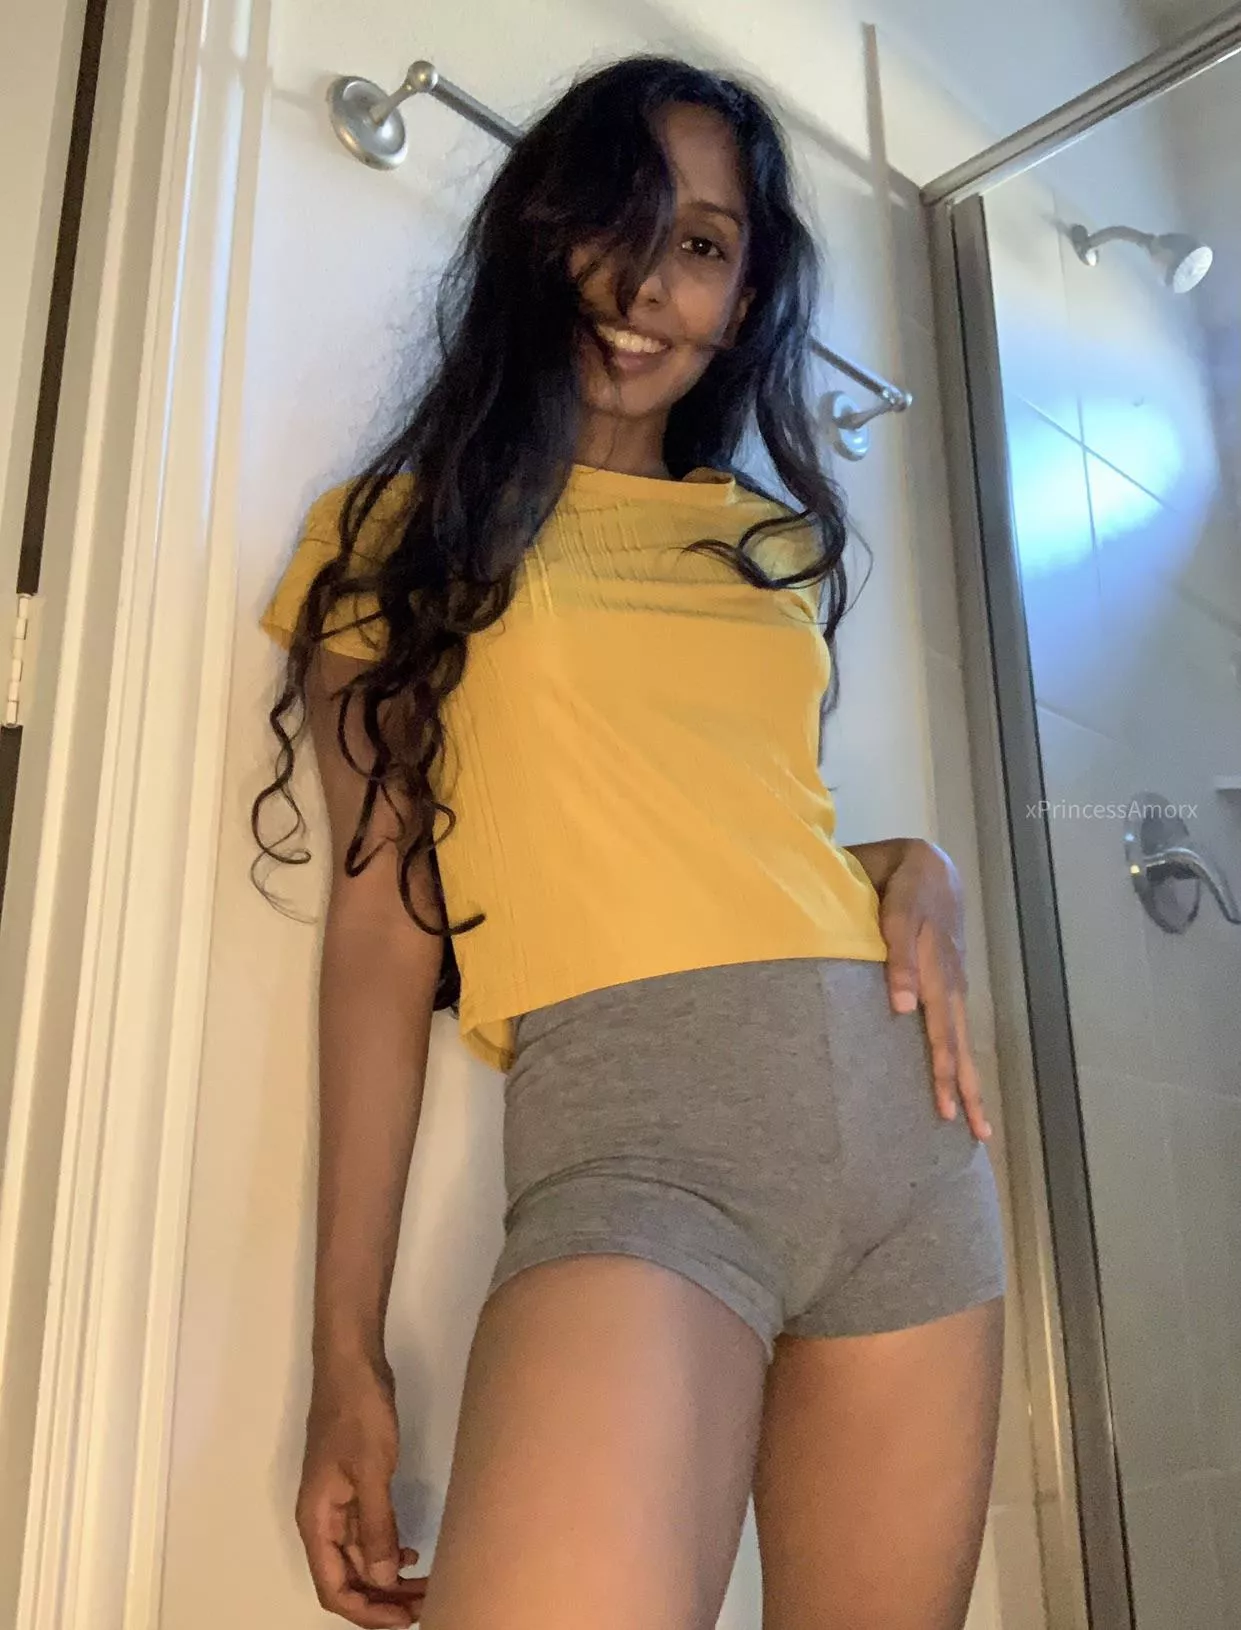 First post here! Just a petite Indian girl in tight shorts! nudes tight_shorts NUDE-PICS